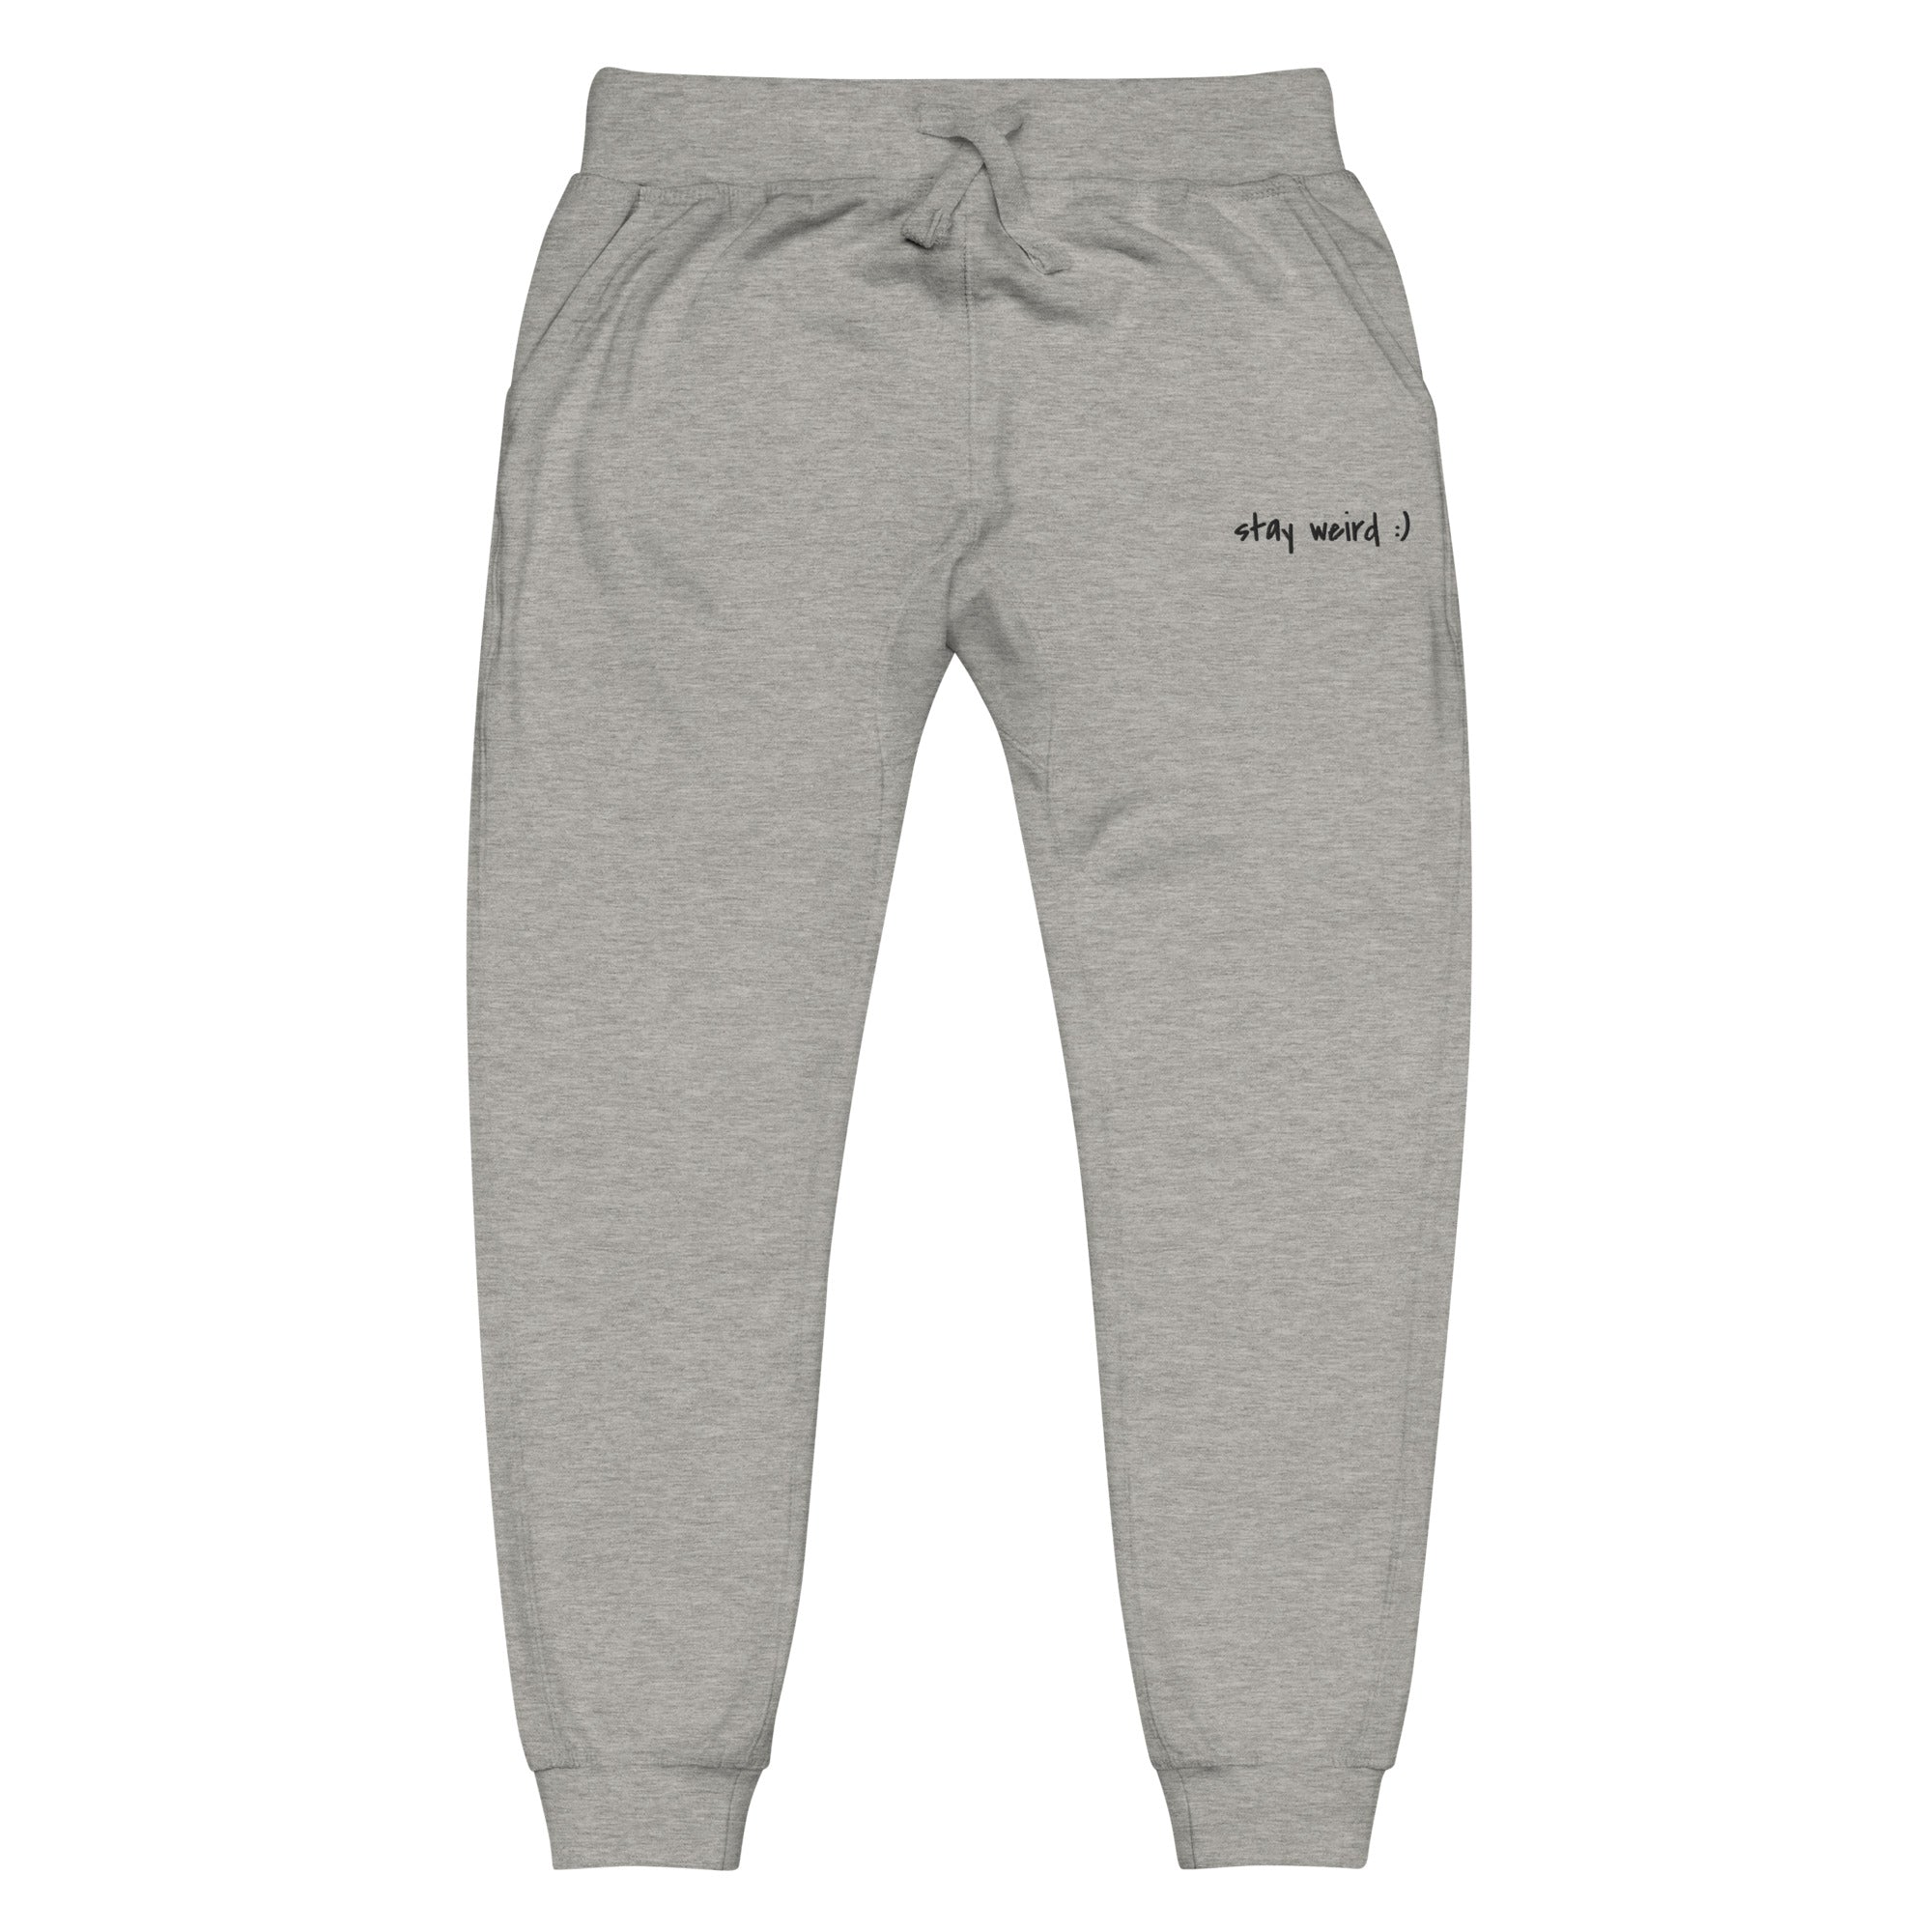 Stay Weird :) Sweatpants (embroidered) – Kendrick Curry